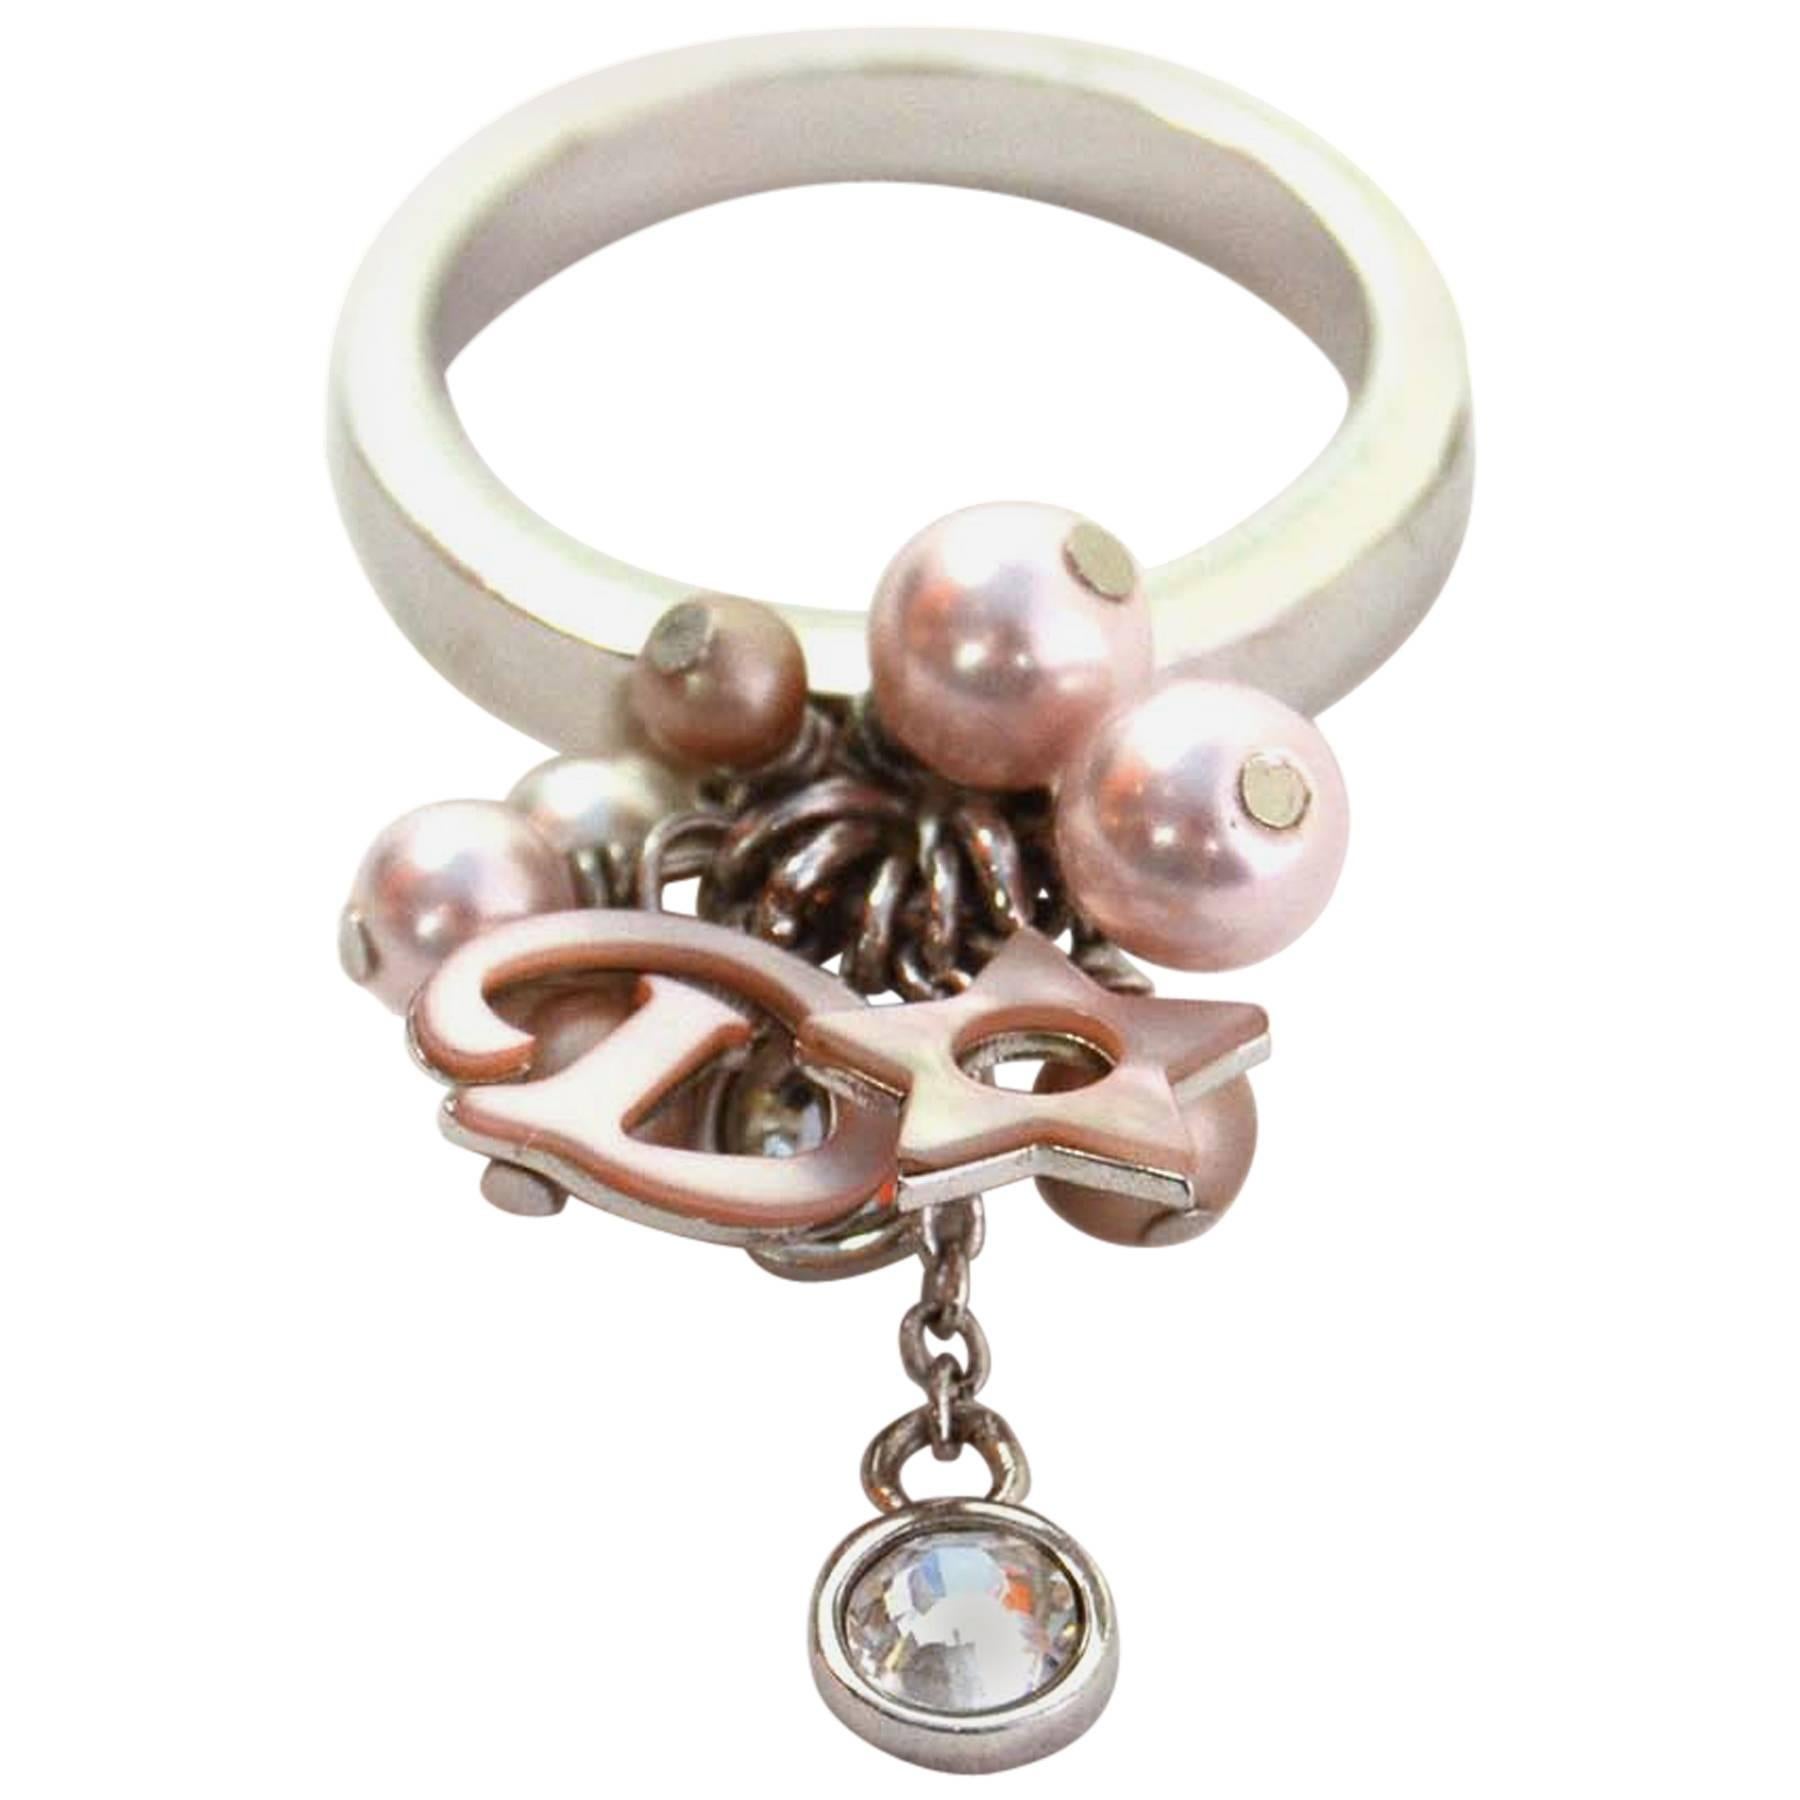 Christian Dior Pink Pearl and Charm Cluster Ring sz 7